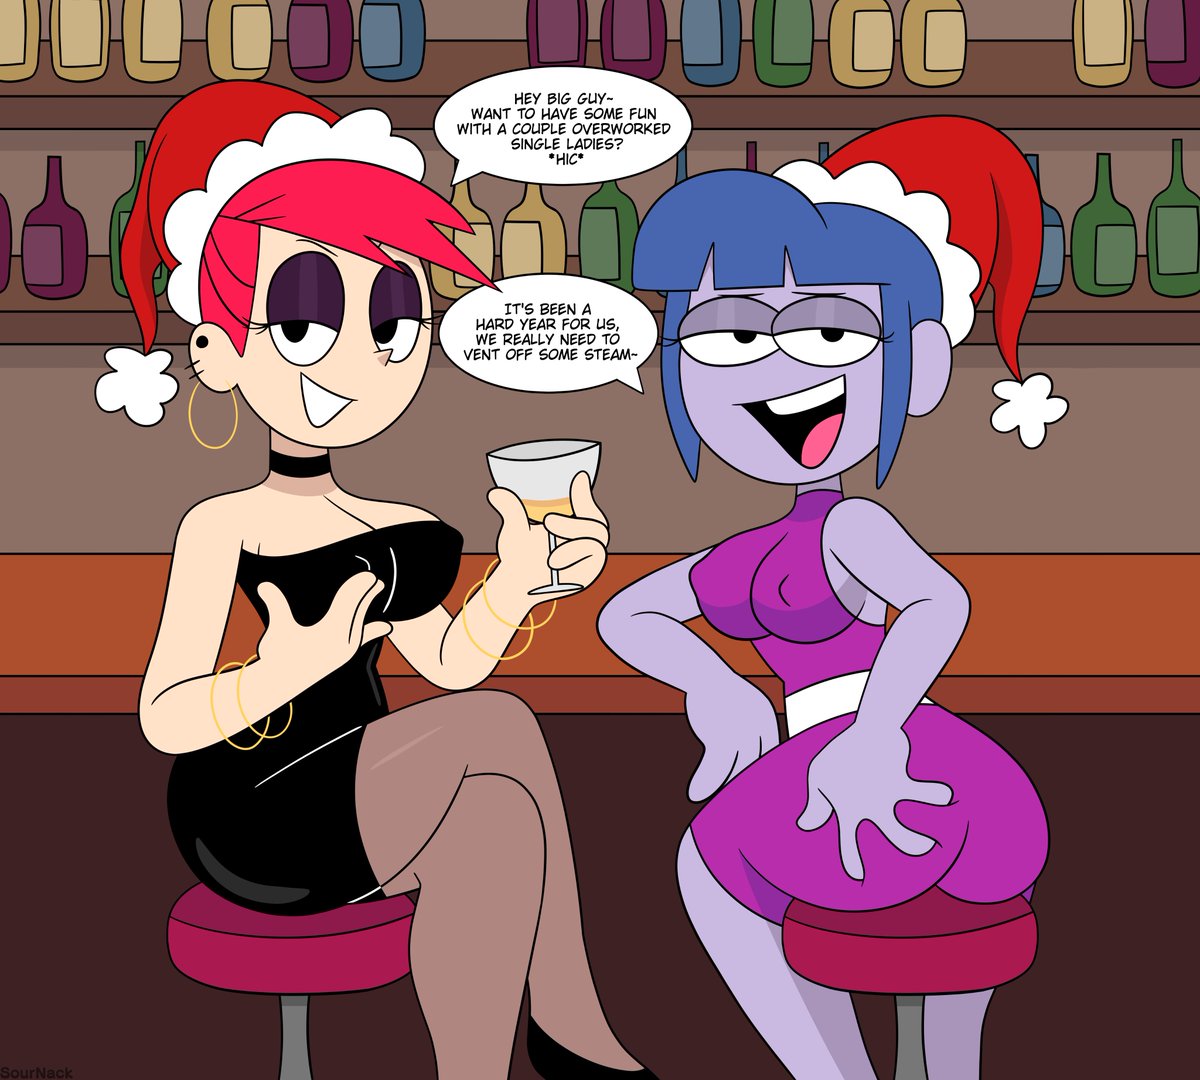 Frankie Cartoon Porn - Frankie and Gloria's New Year Eve Celebration Porn Comics by [SourNack]  (Fosters Home For Imaginary Friends) Rule 34 Comics â€“ R34Porn